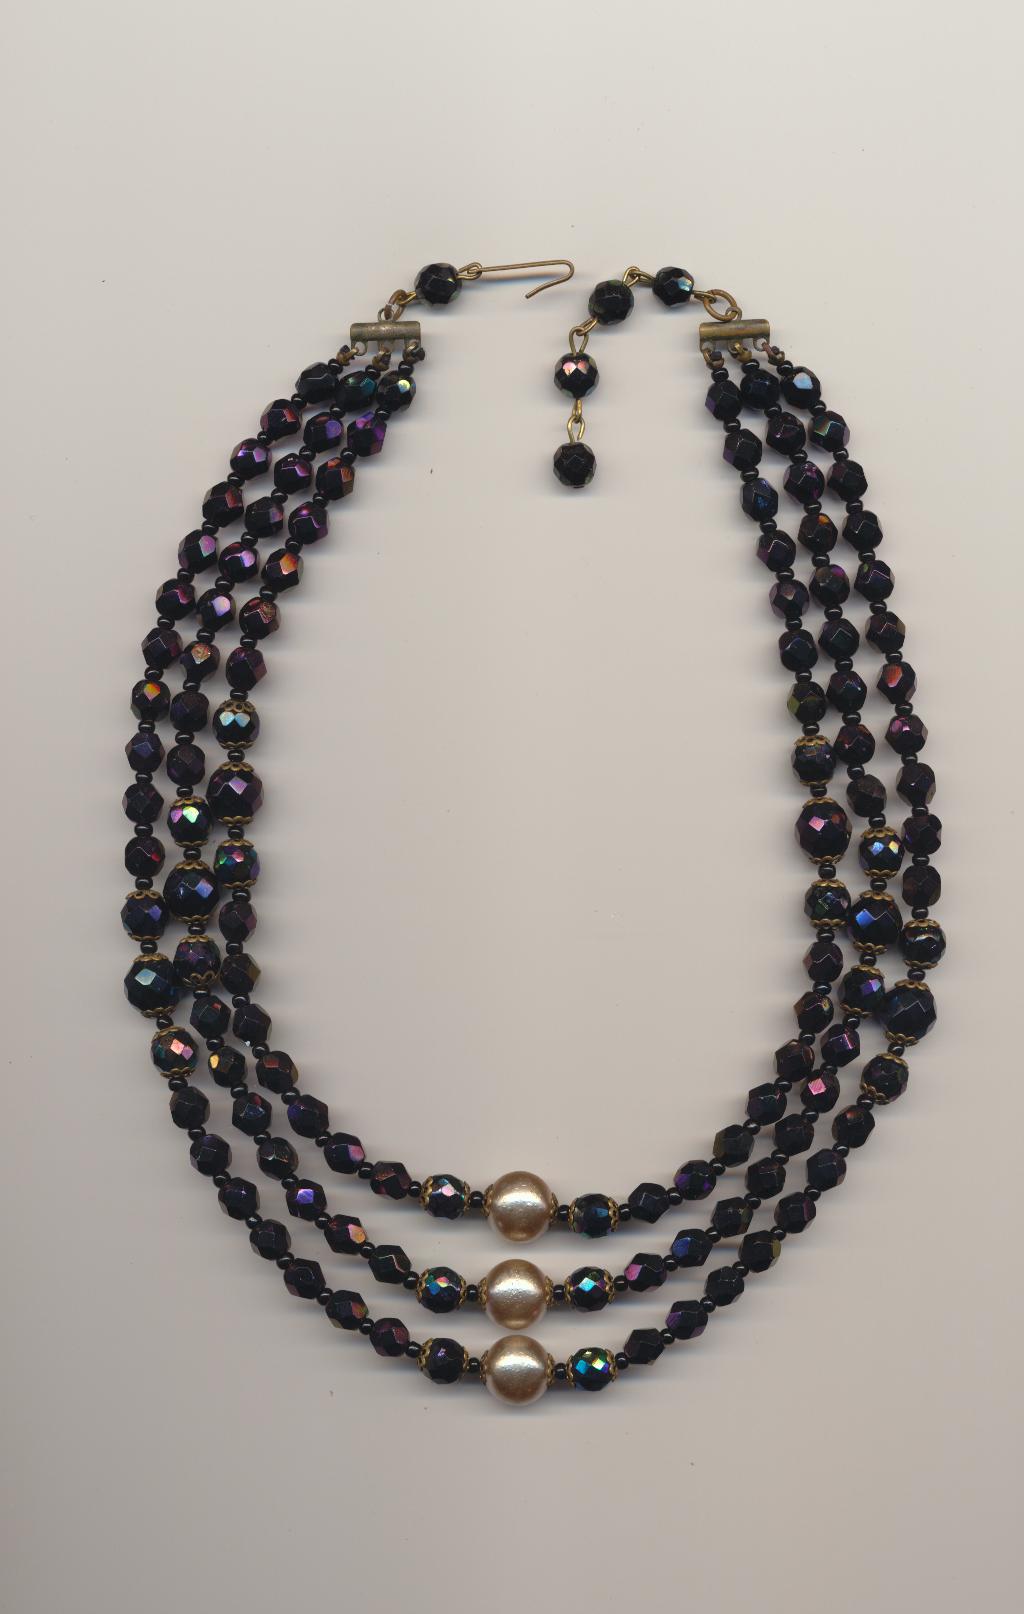 Elegant three strand vintage necklace made of aurora borealis black crystal beads and pearly coated glass beads, Germany, early 1960's, length inner row 14.5'' 37cm., outer row 18'' 46cm.